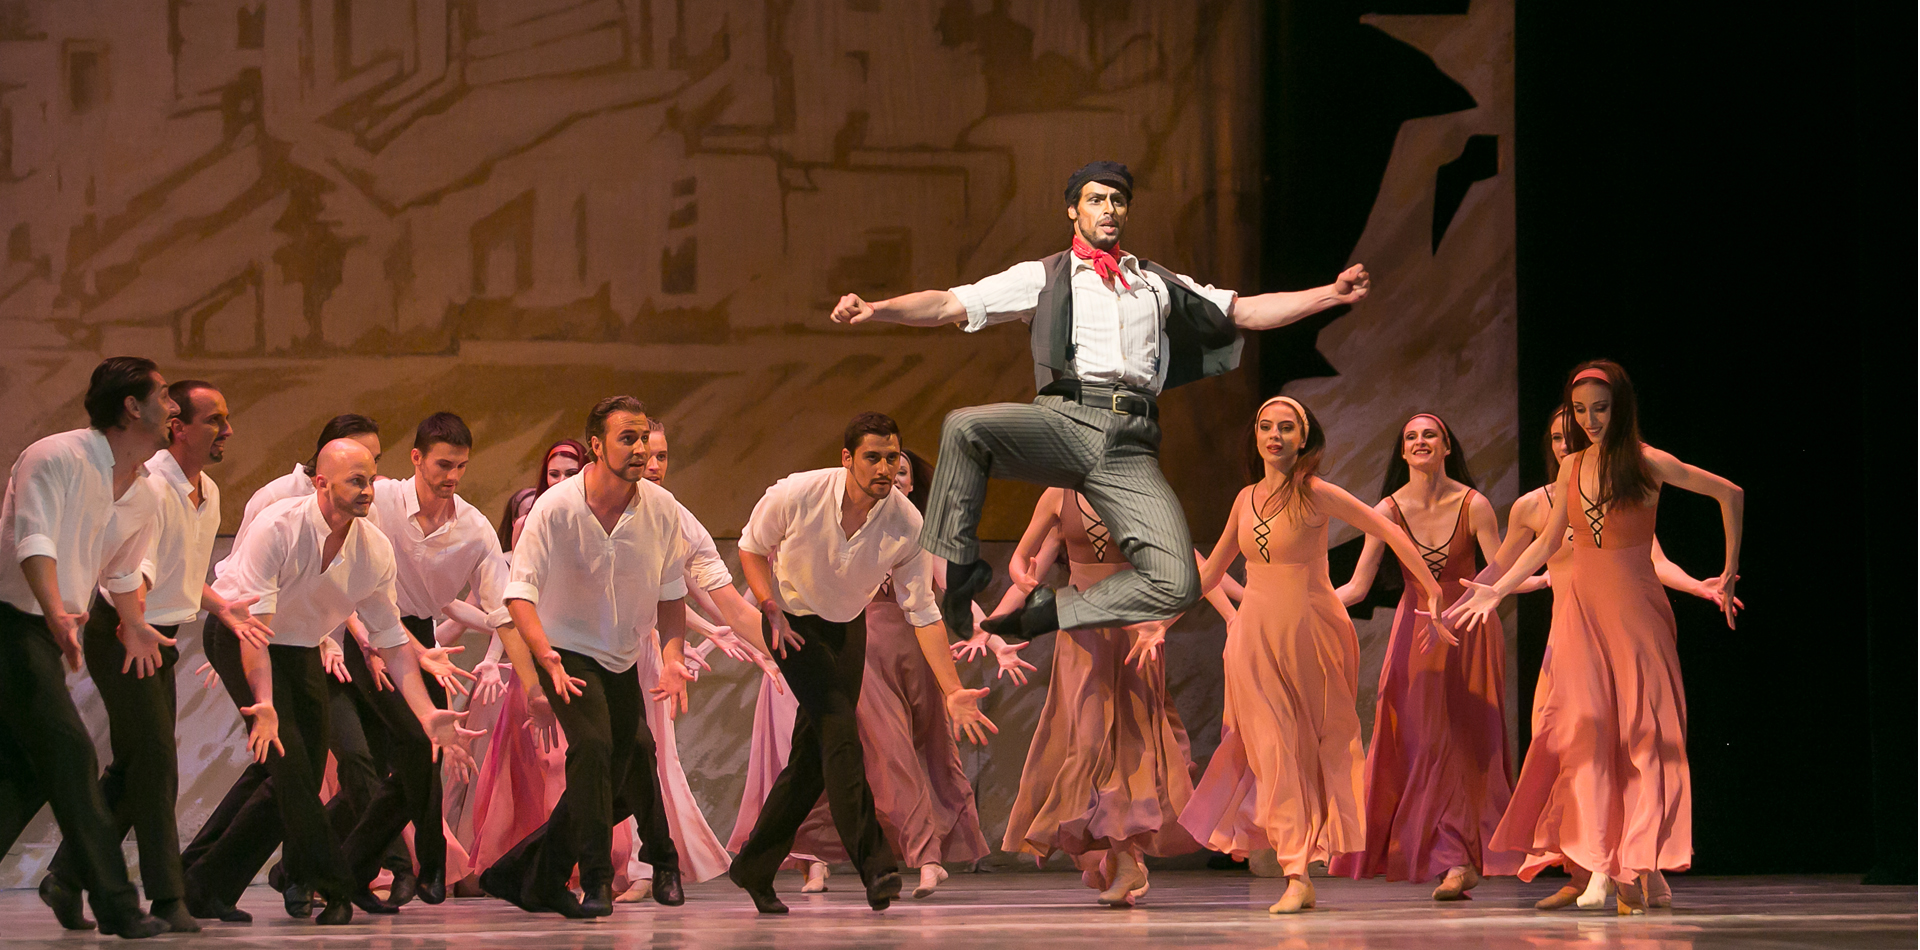 On 20, 21, 22 October and 12 November the character born from the pen of Nikos Kazantzakis will come to life in the ballet "Zorba the Greek"